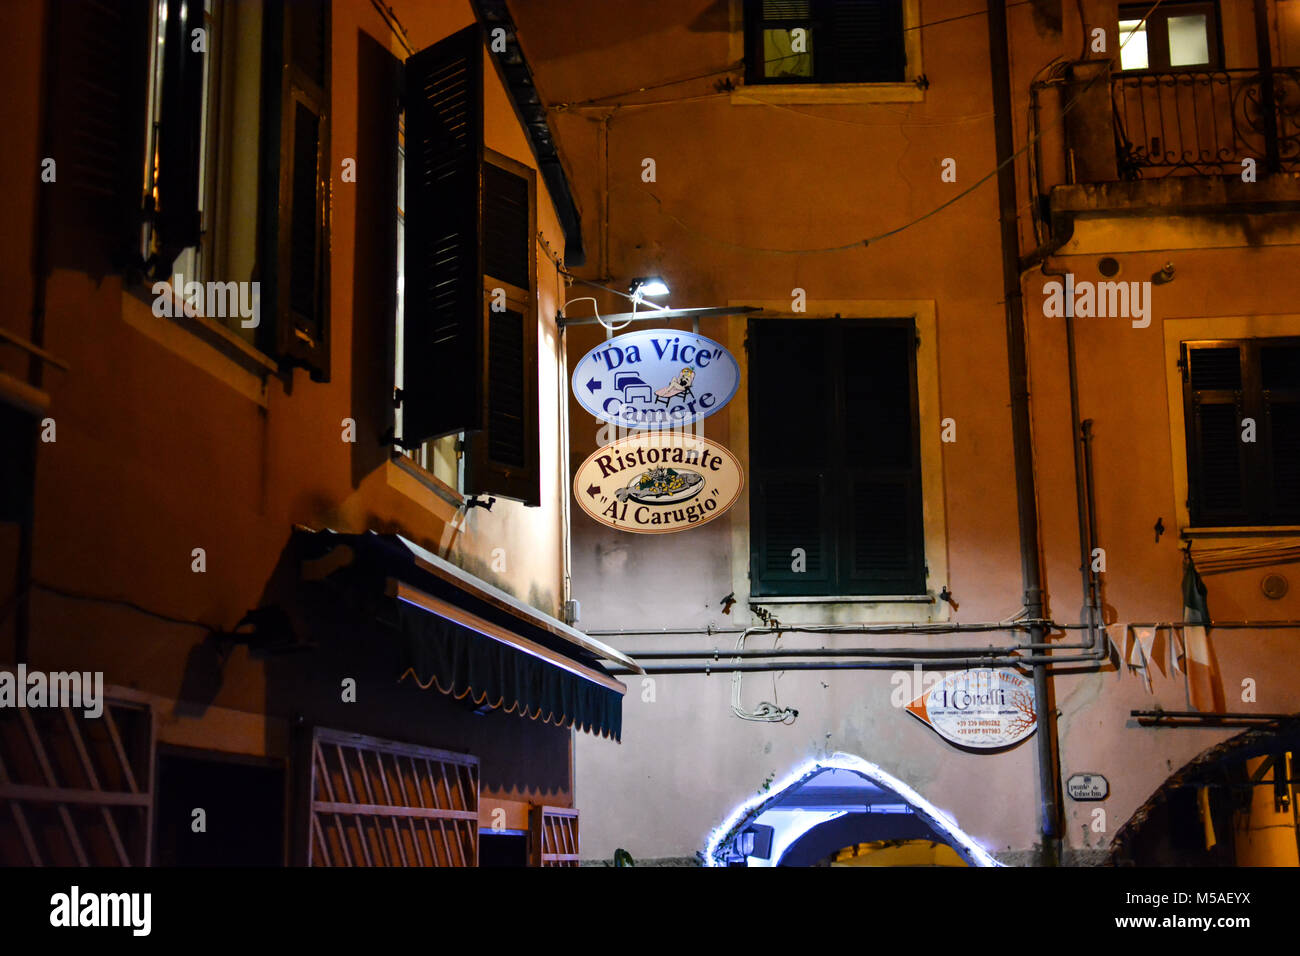 Late night in Monterosso Al Mare, Cinque Terre Italy with a colorful sign of violet and peach advertising an Italian restaurant and rooms for rent Stock Photo